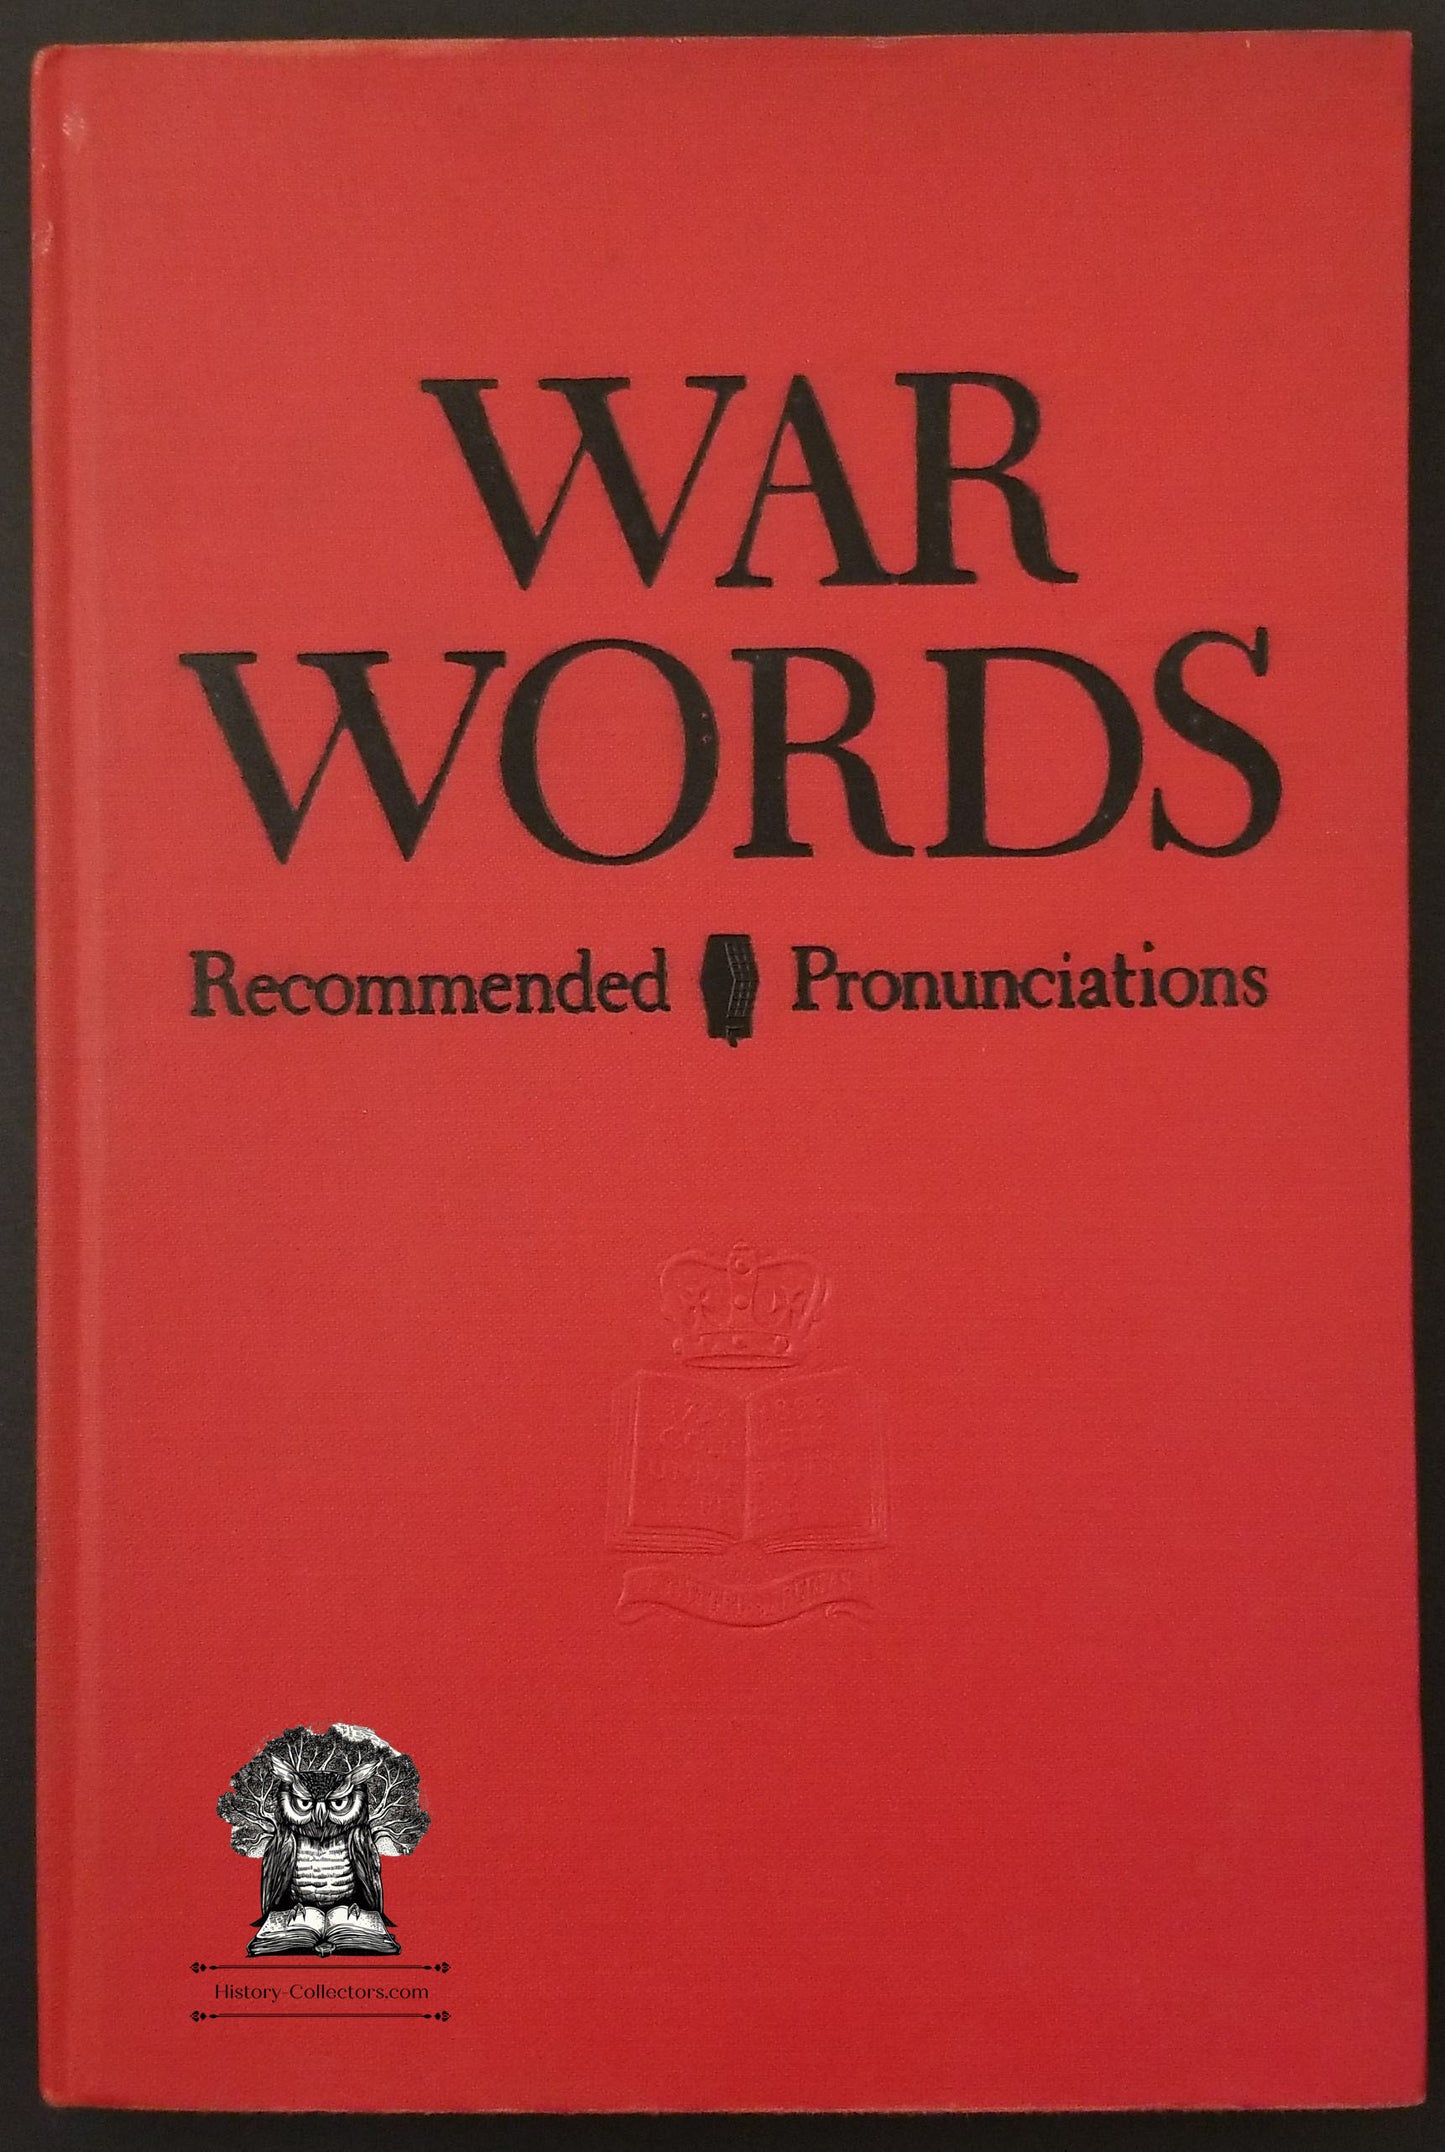 1943 War Words Pronunciations Hardcover Book - CBS Radio WWII Broadcasting - W Cabell Greet